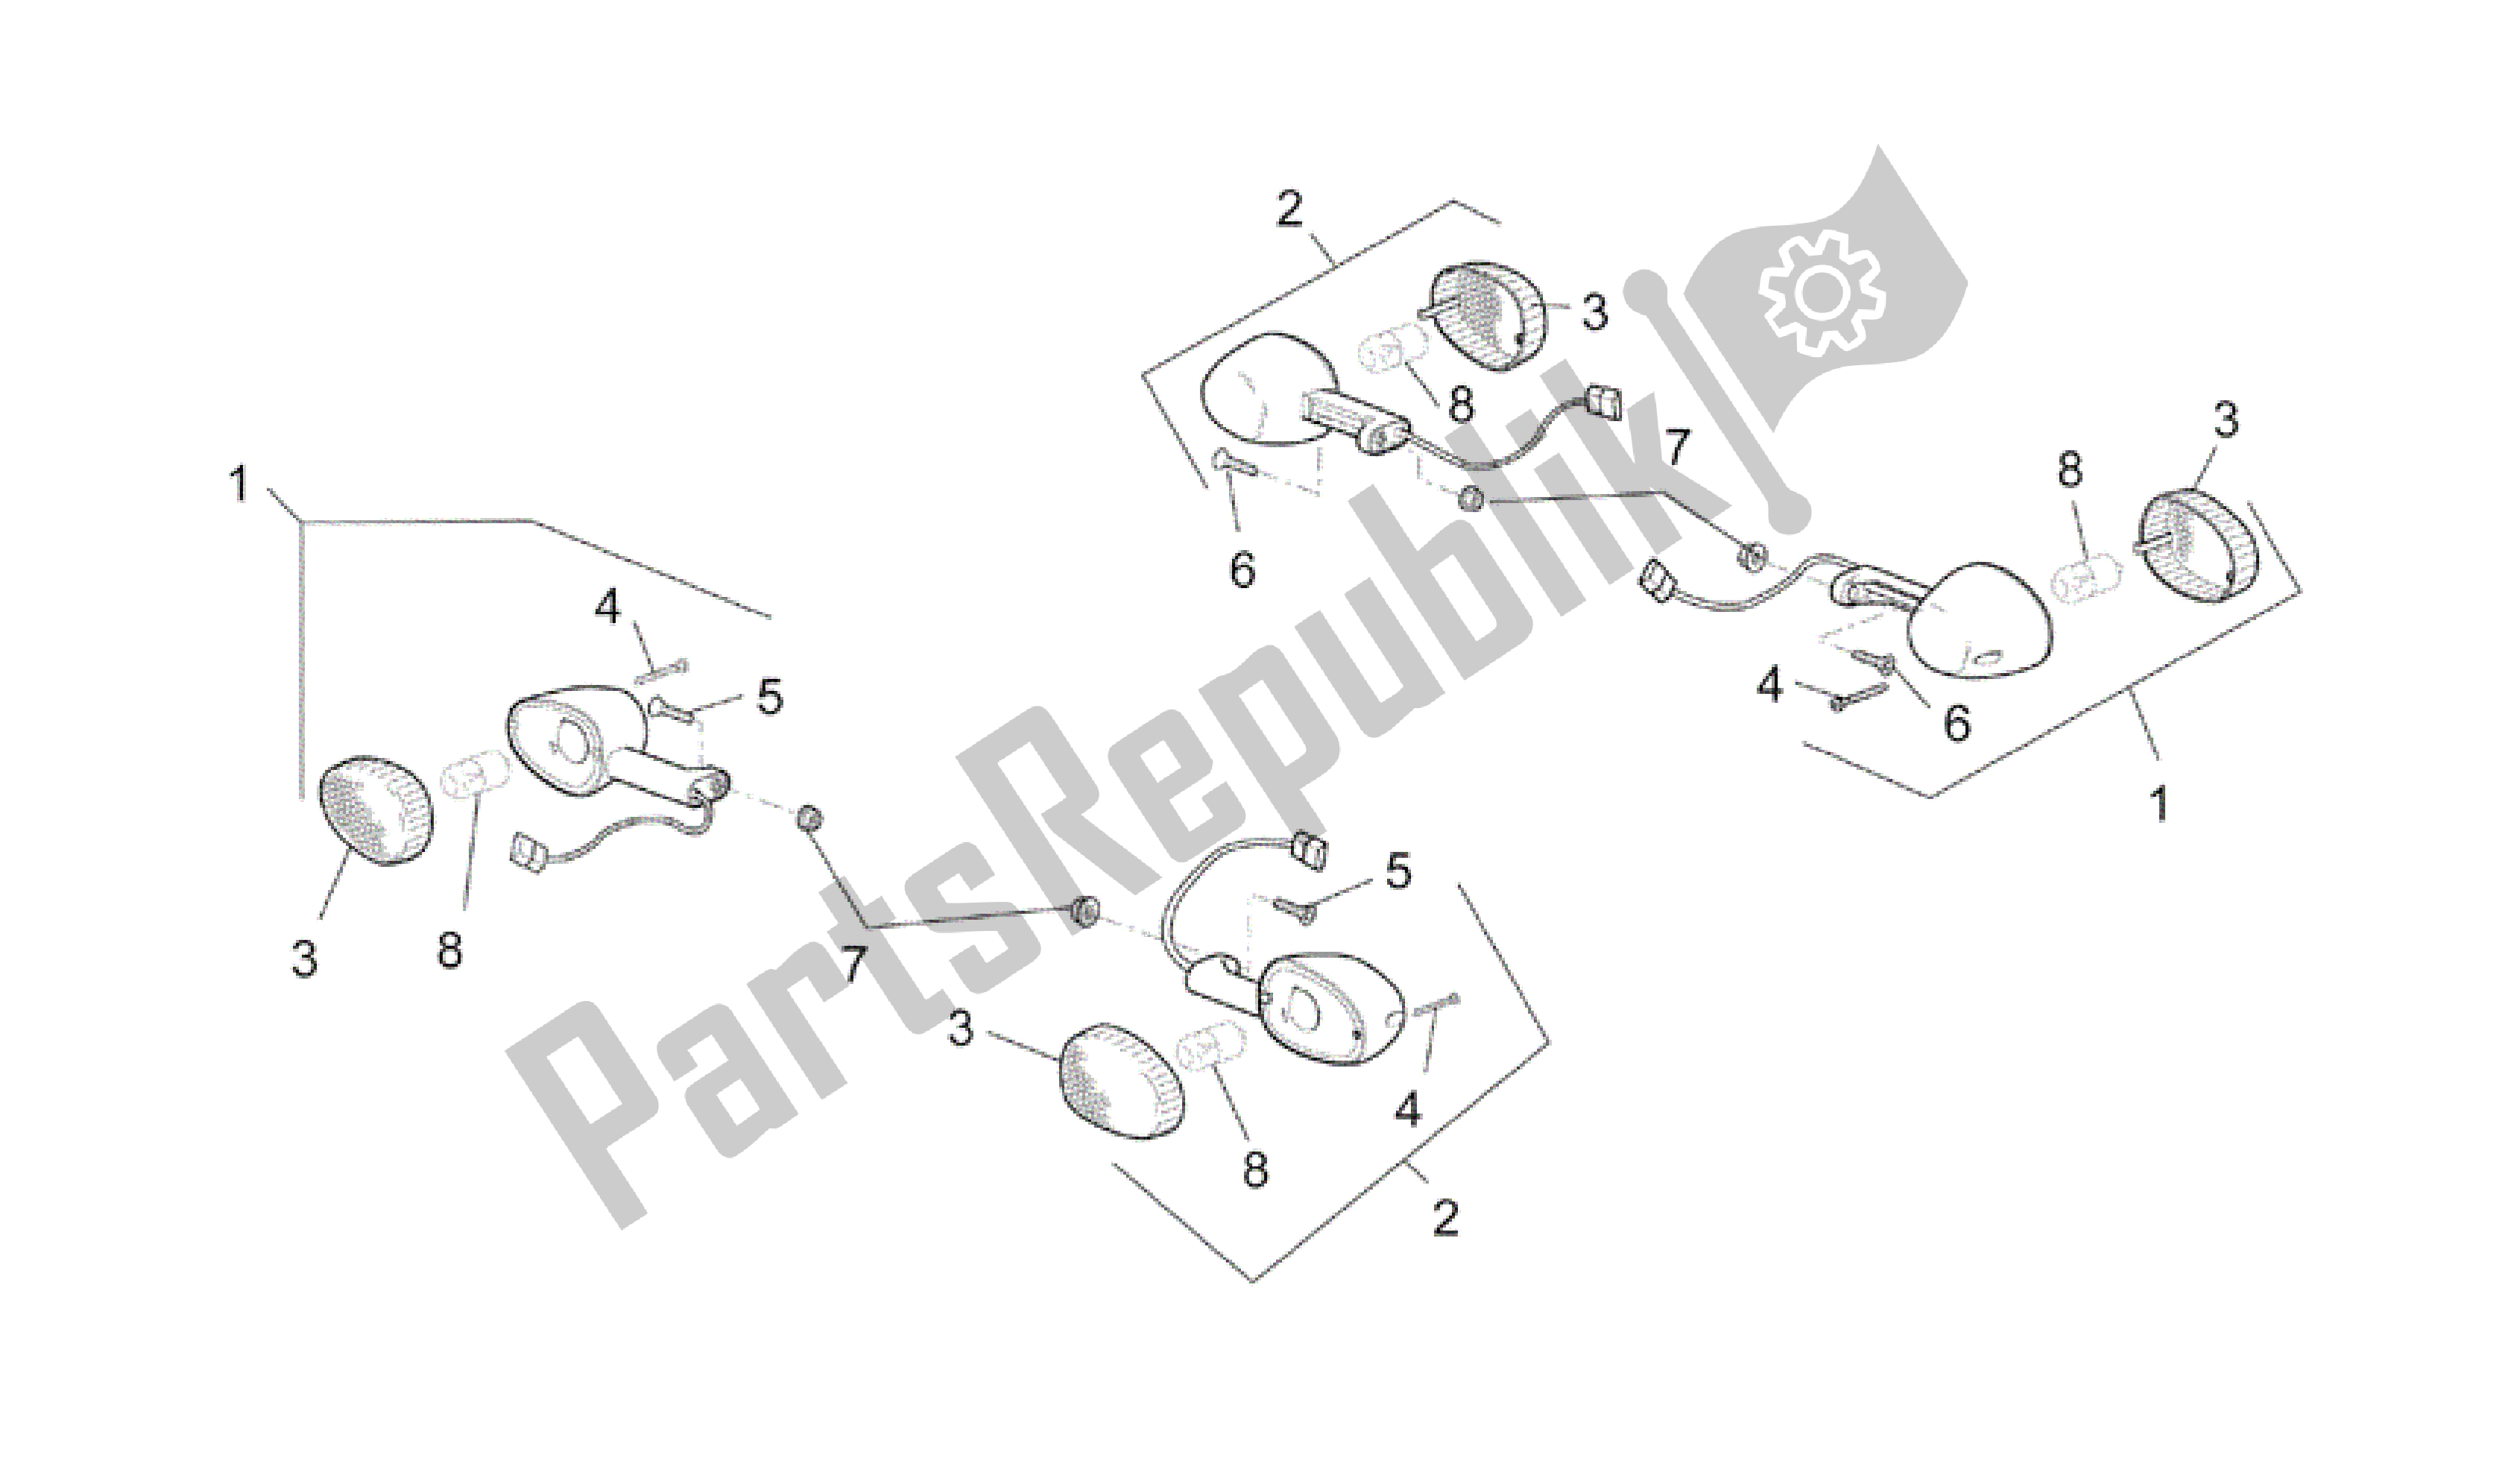 All parts for the Turn Indicators of the Aprilia RSV Mille 3963 1000 2003